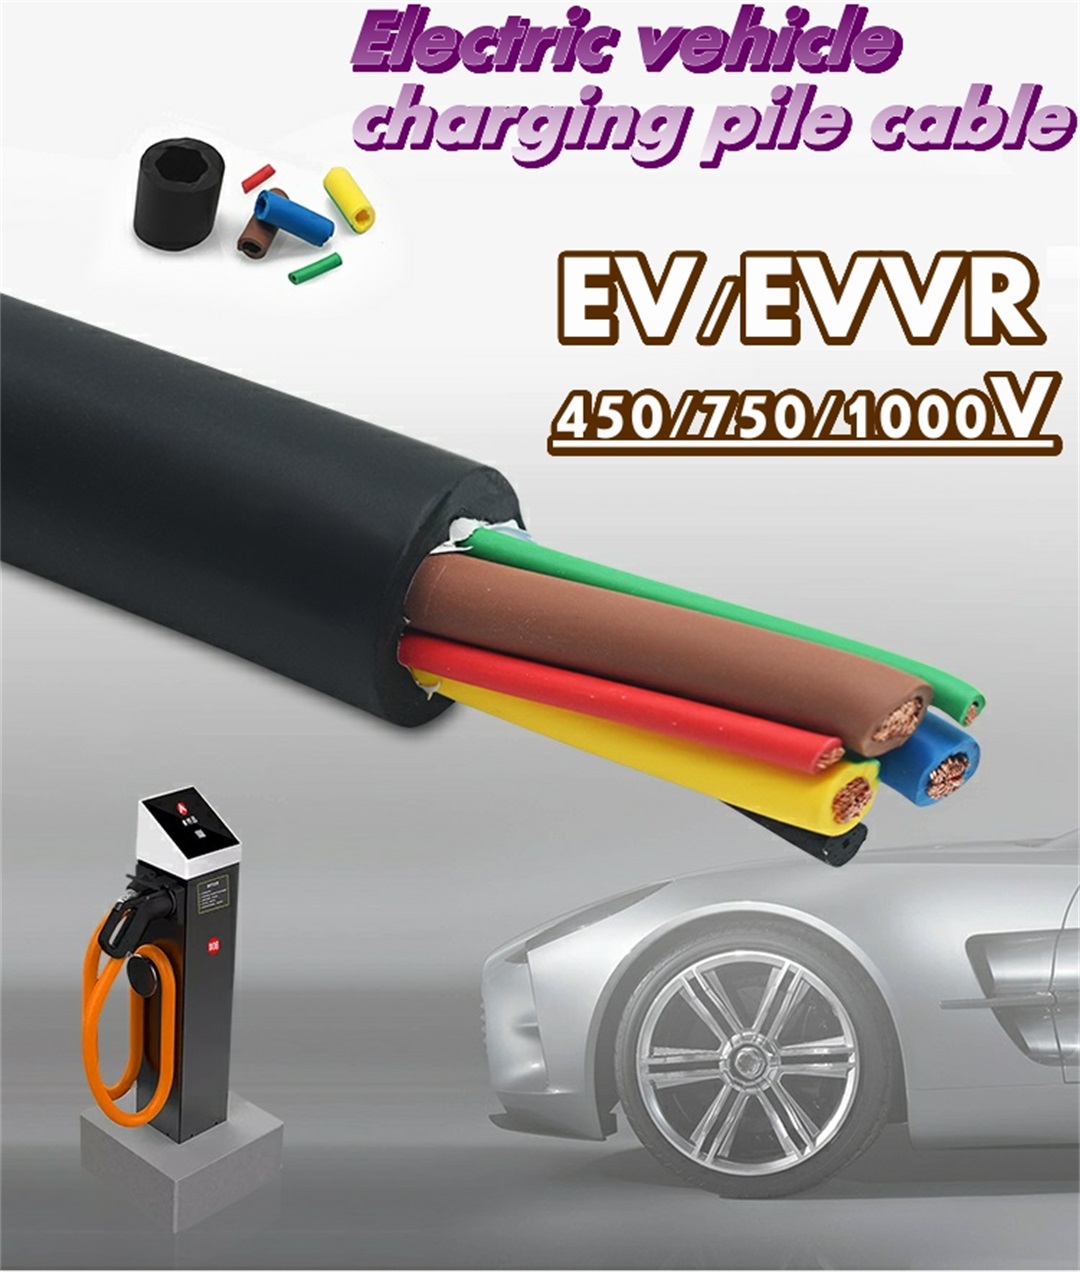 Electric vehicle charging pile cable